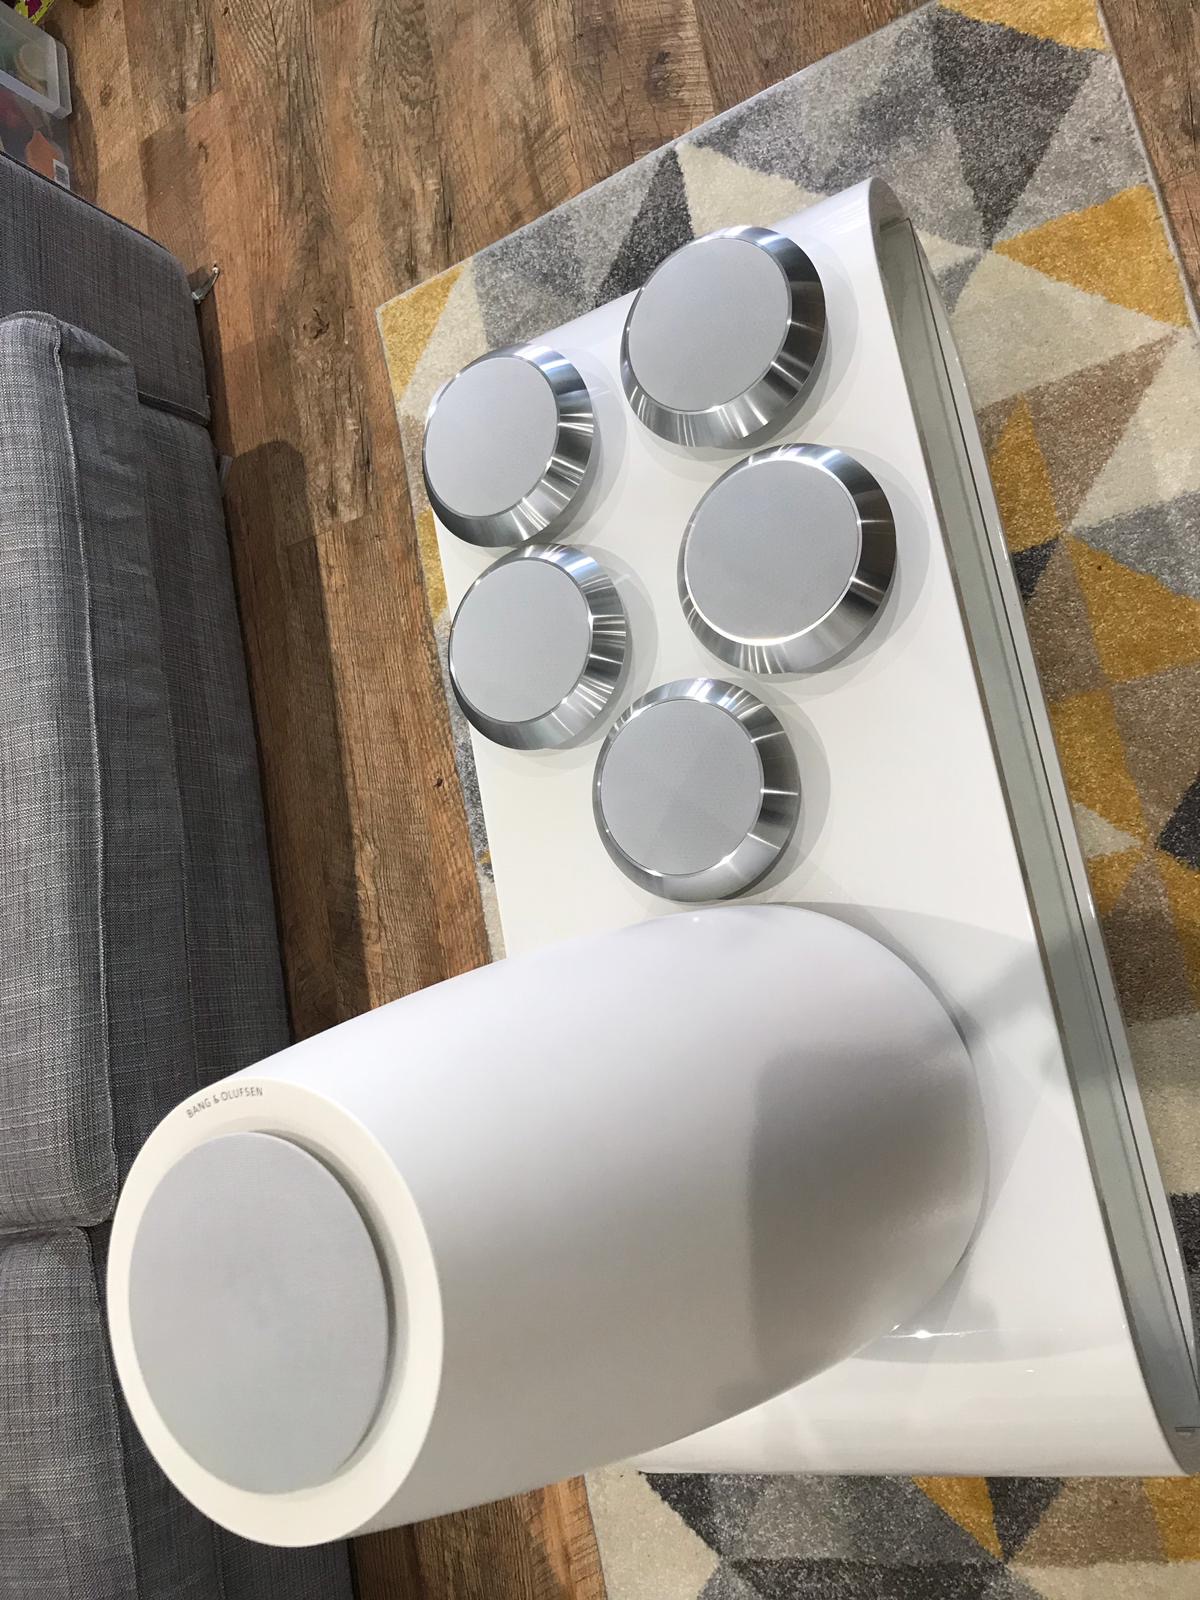 BeoLab 14 Cover Bang & Olufsen Abdeckungen BeoPlay B&O Sets 